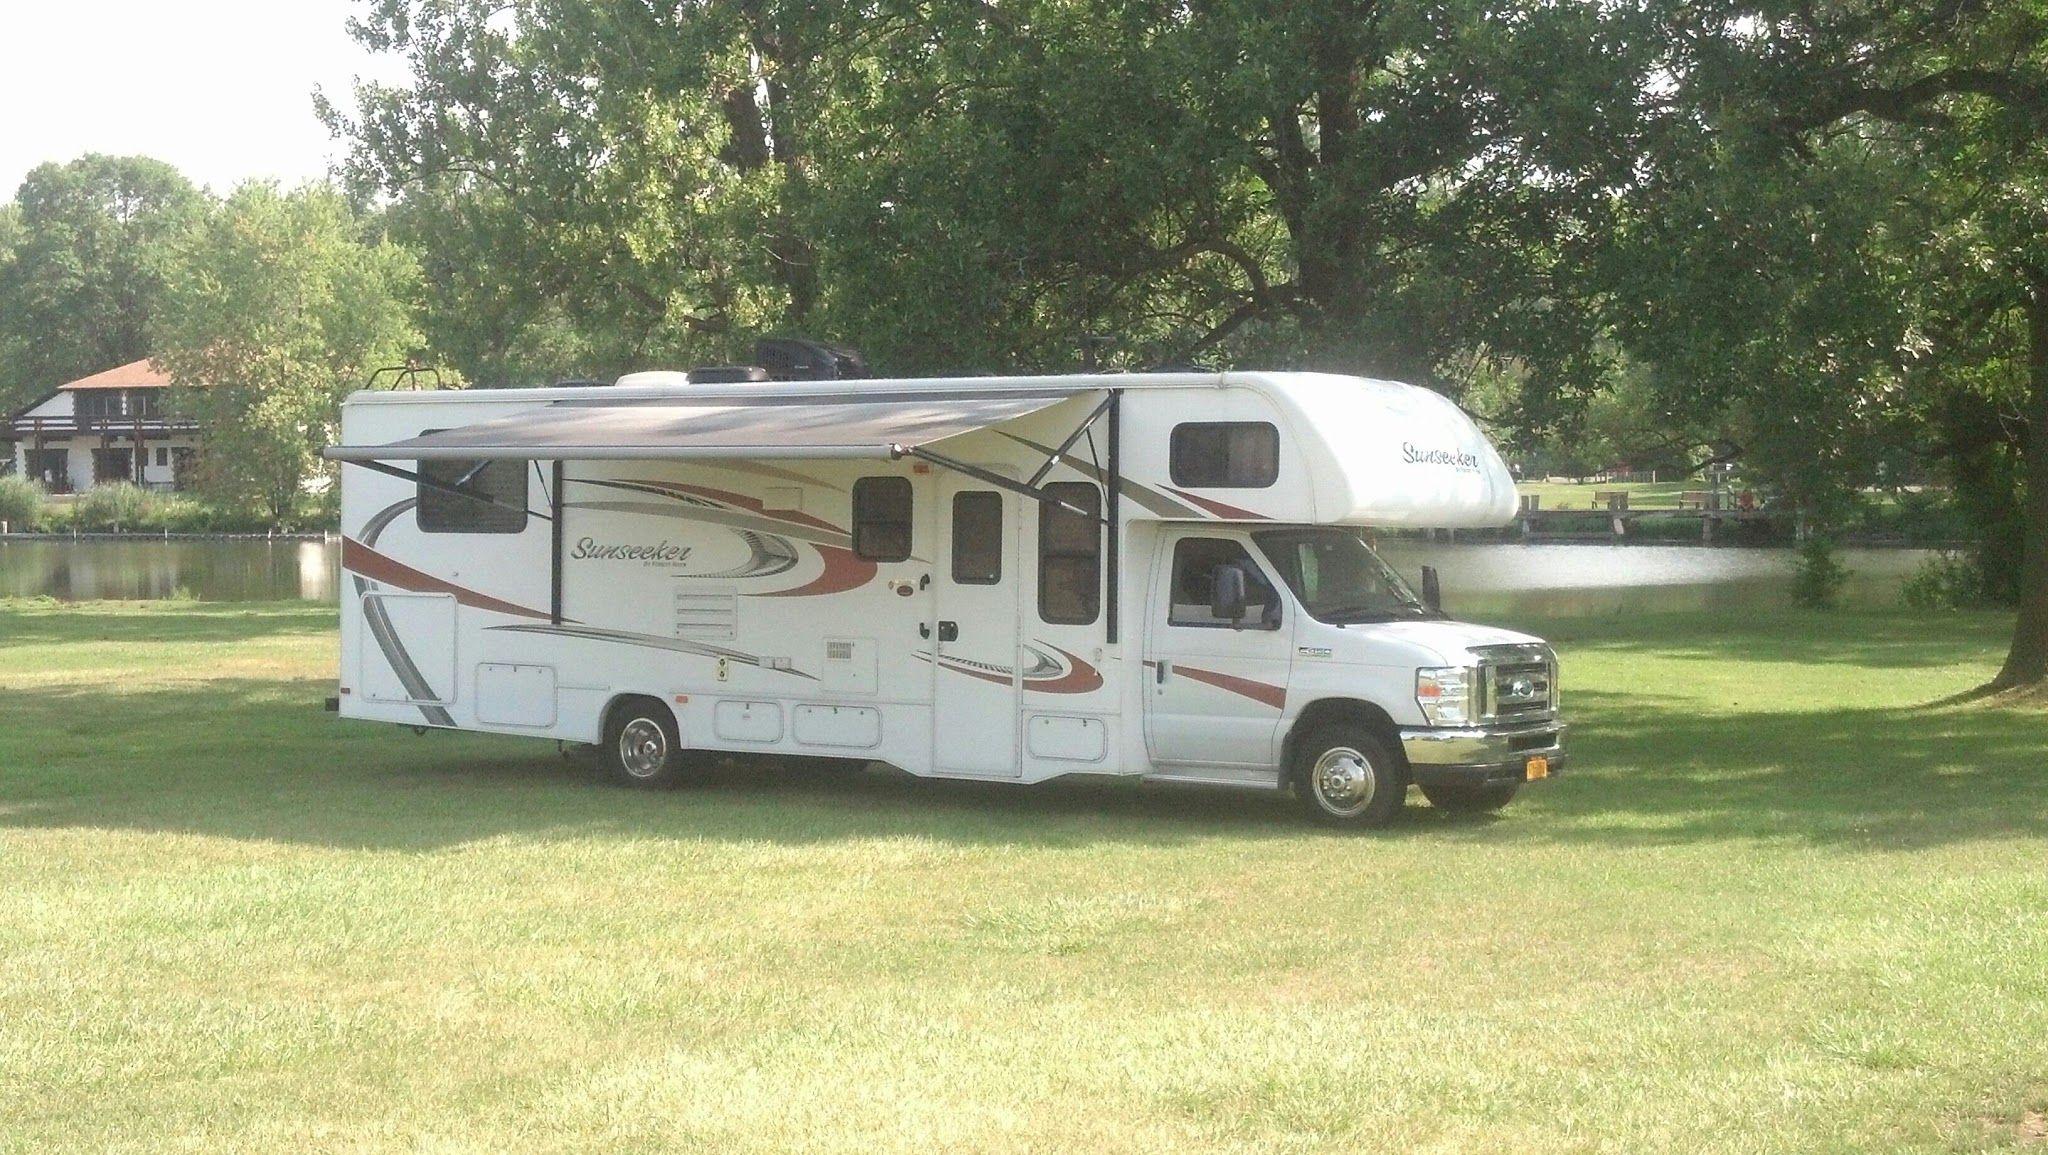 Services & Products Service Van Equipment & RV Specialist/Four Seasons RV Rental in Liverpool NY